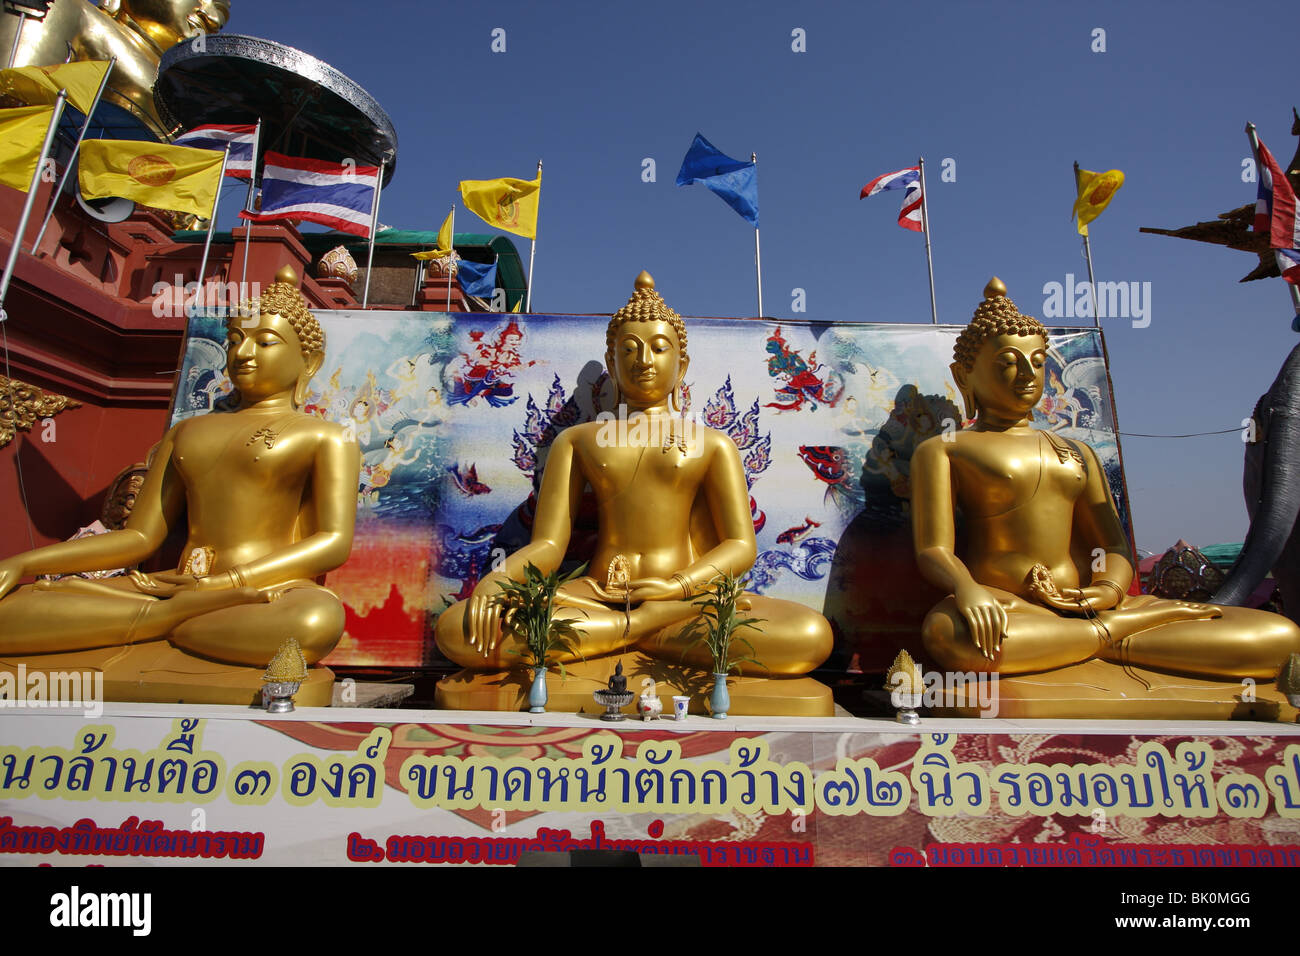 Gold Buddhas at Sop Ruak, The Golden Triangle, by the Mekong in Northern Thailand Stock Photo